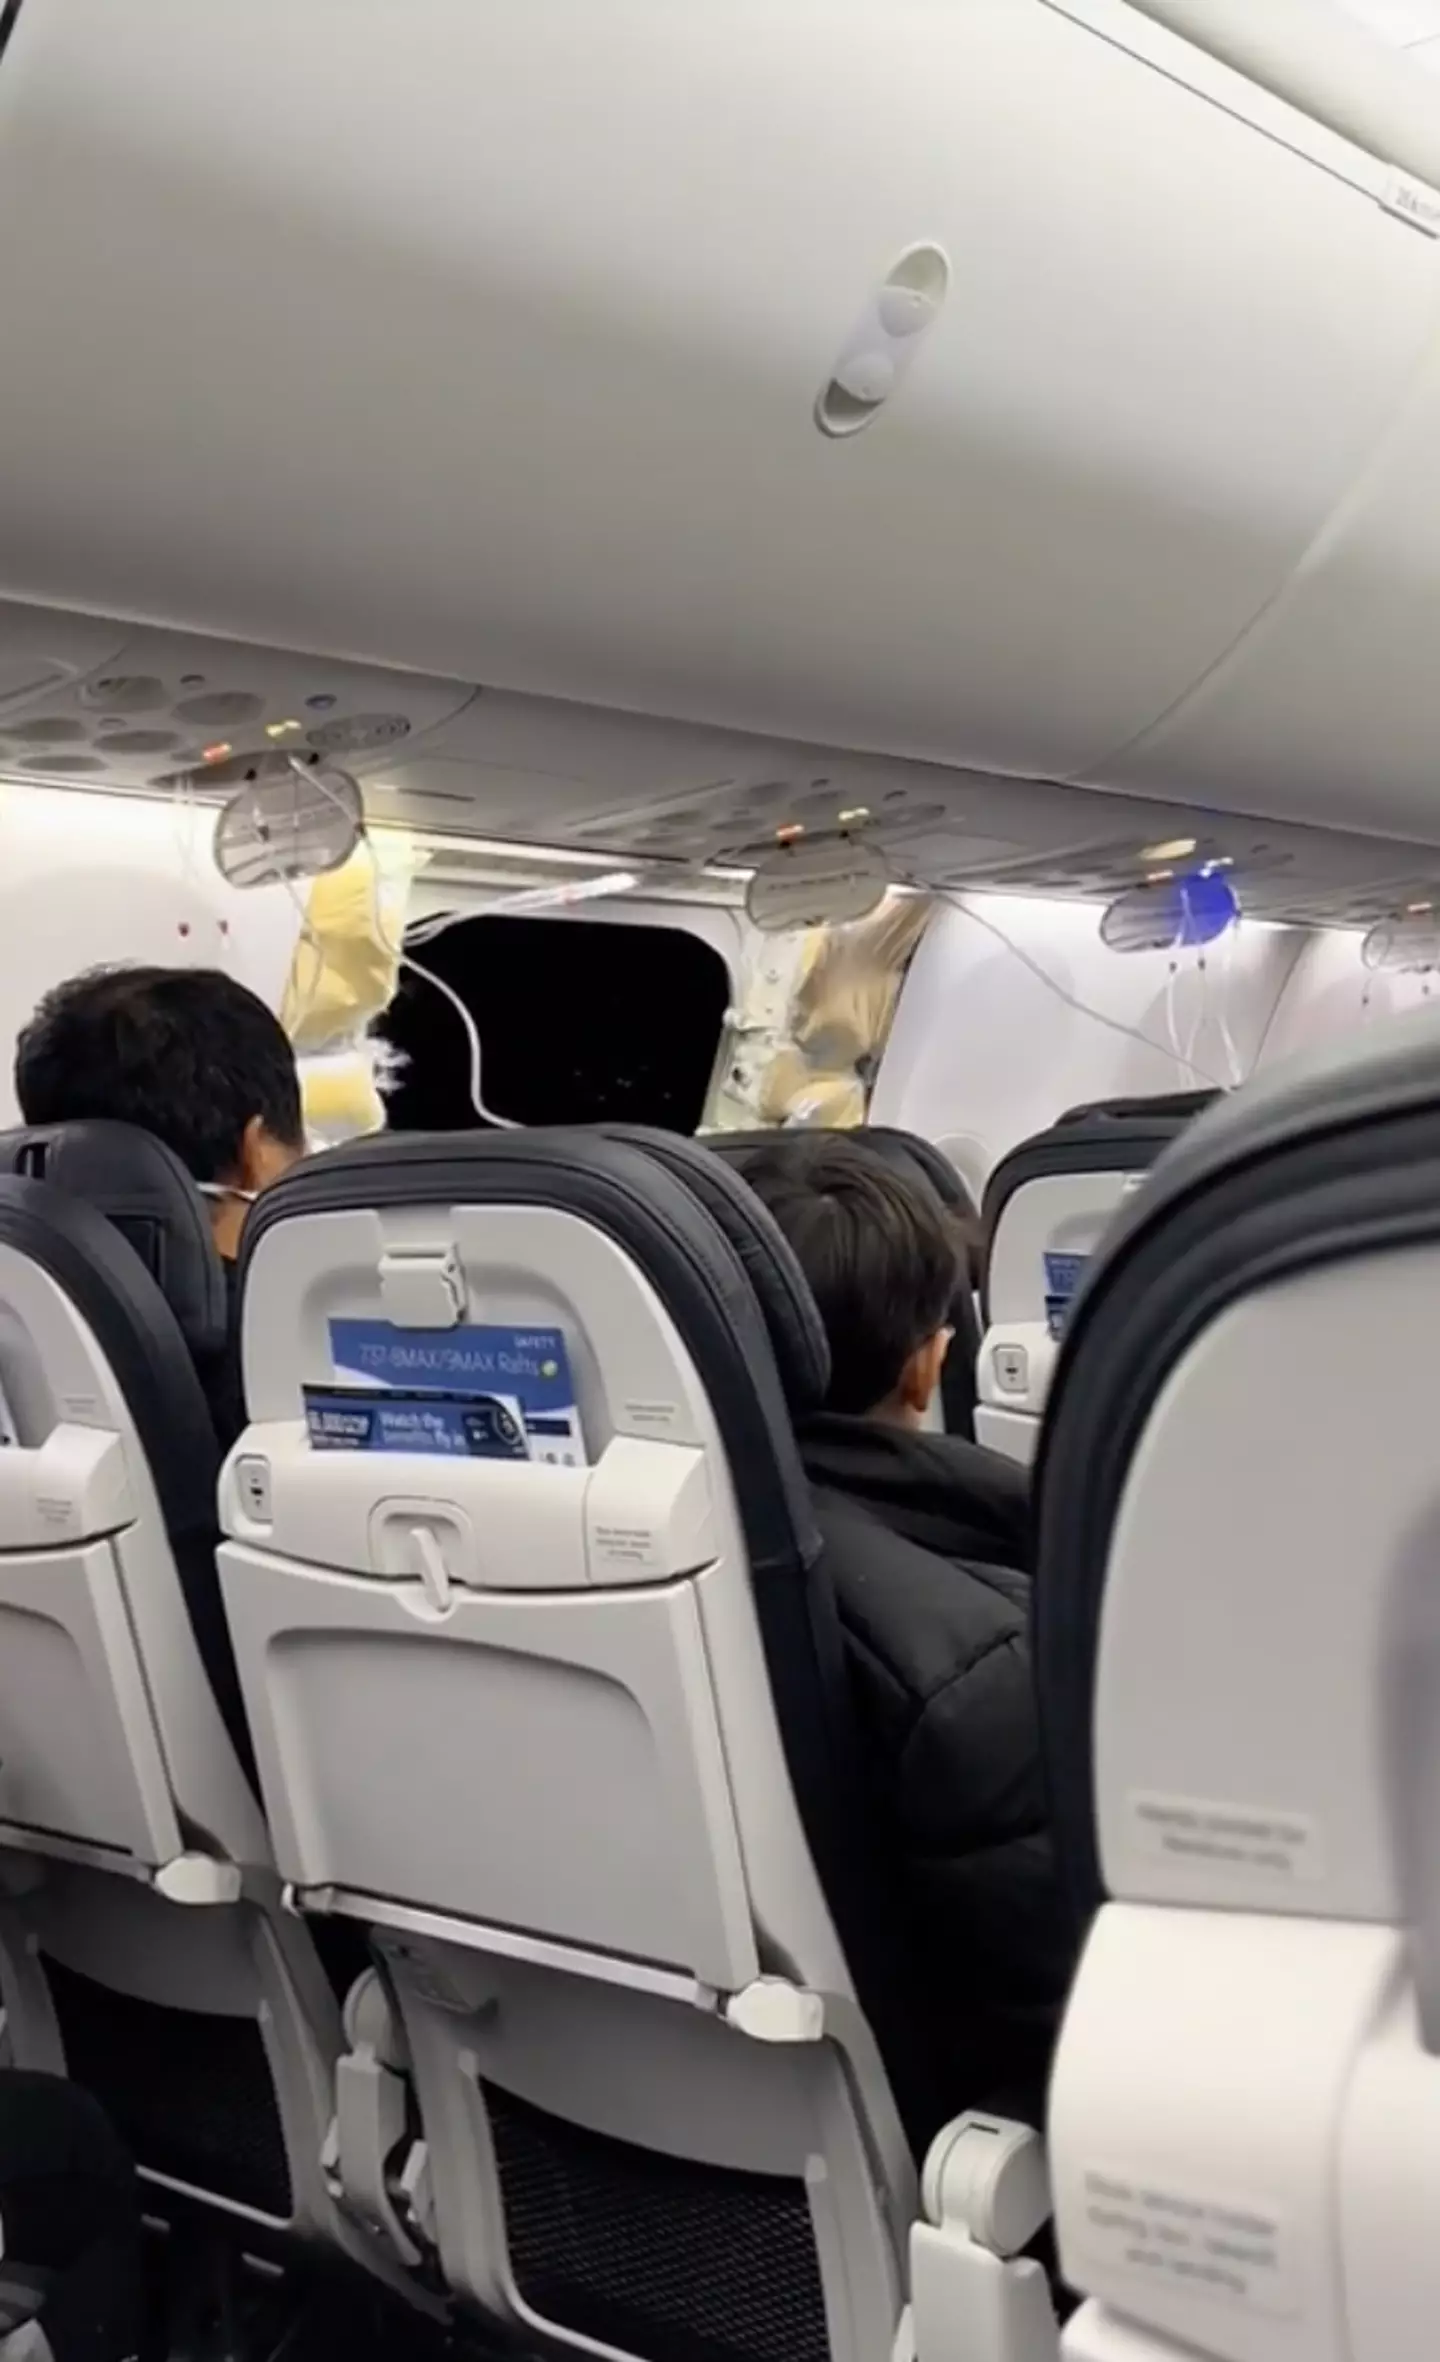 A cabin door plug blew out mid-flight during an Alaska Airlines flight on 5 January.